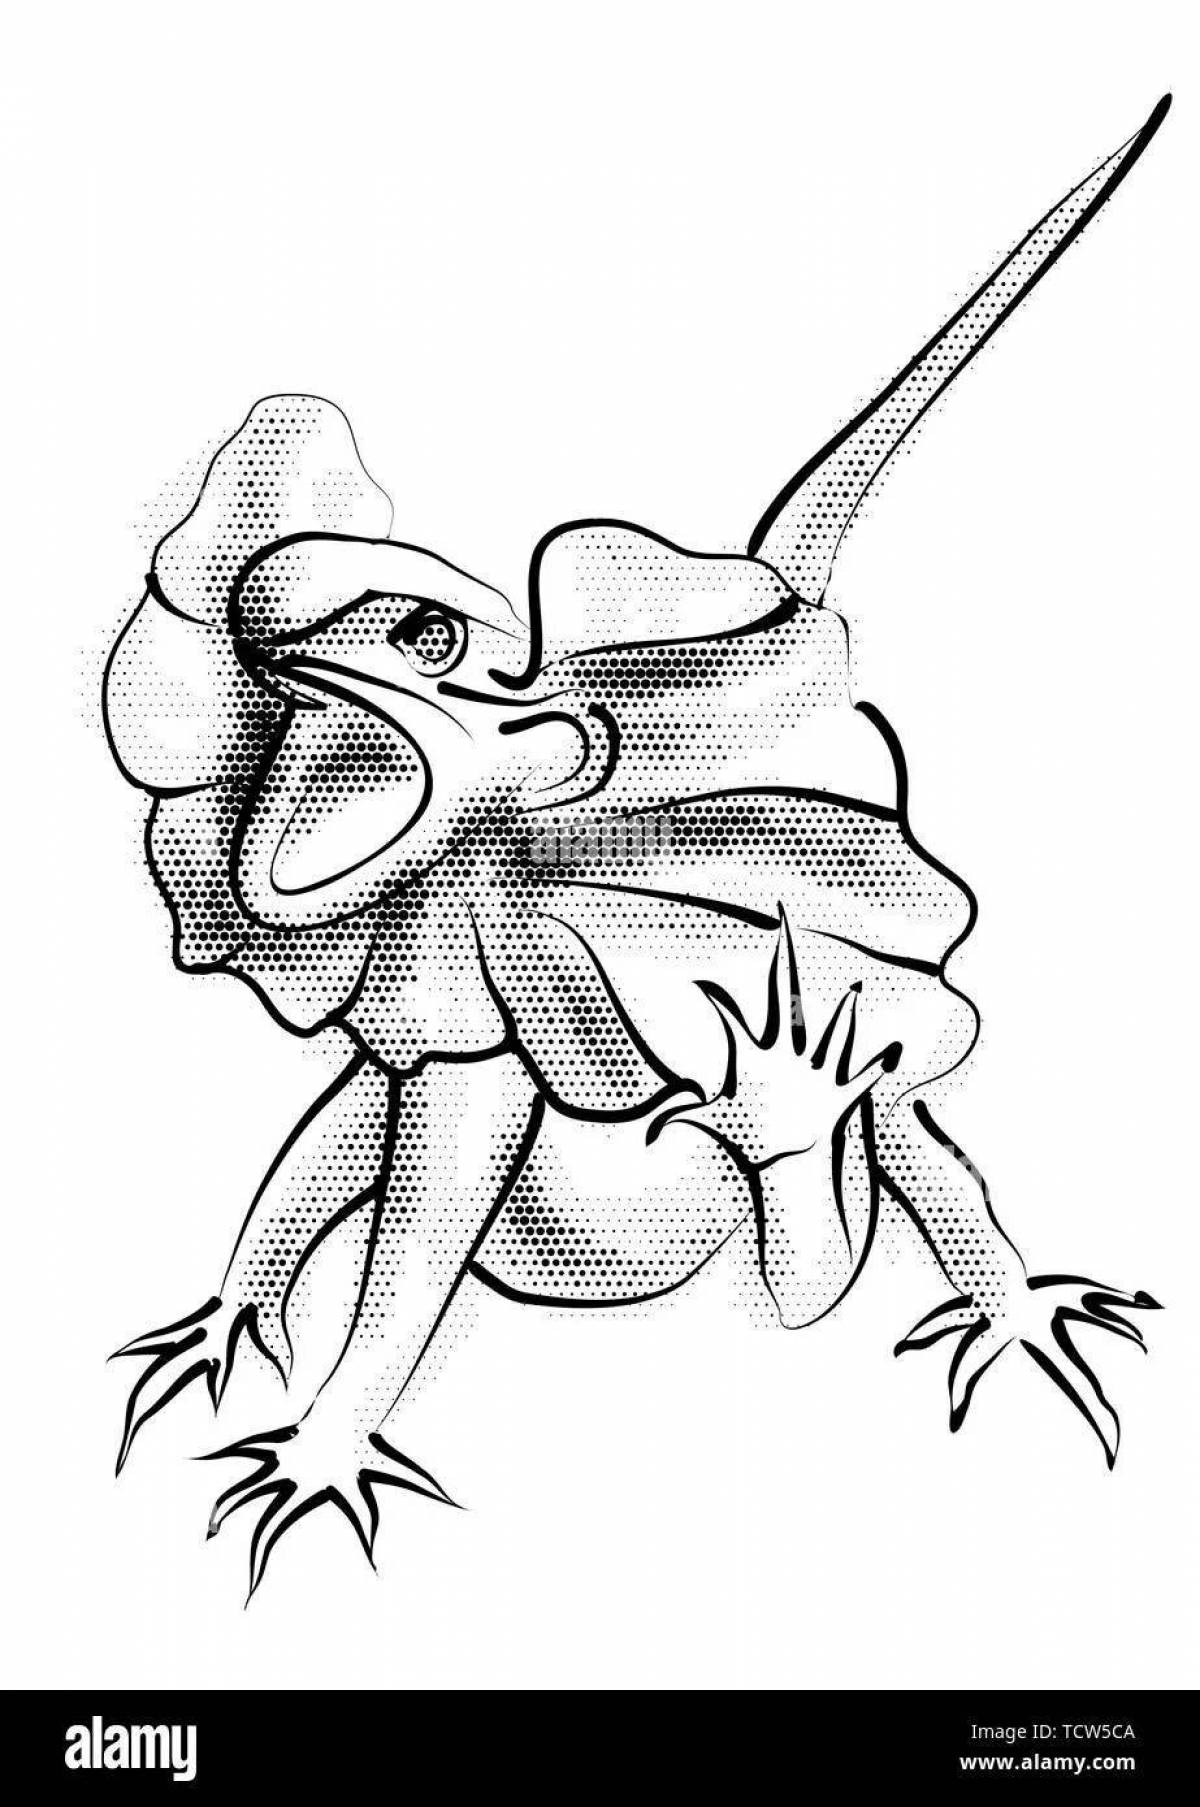 Majestic frilled lizard coloring page